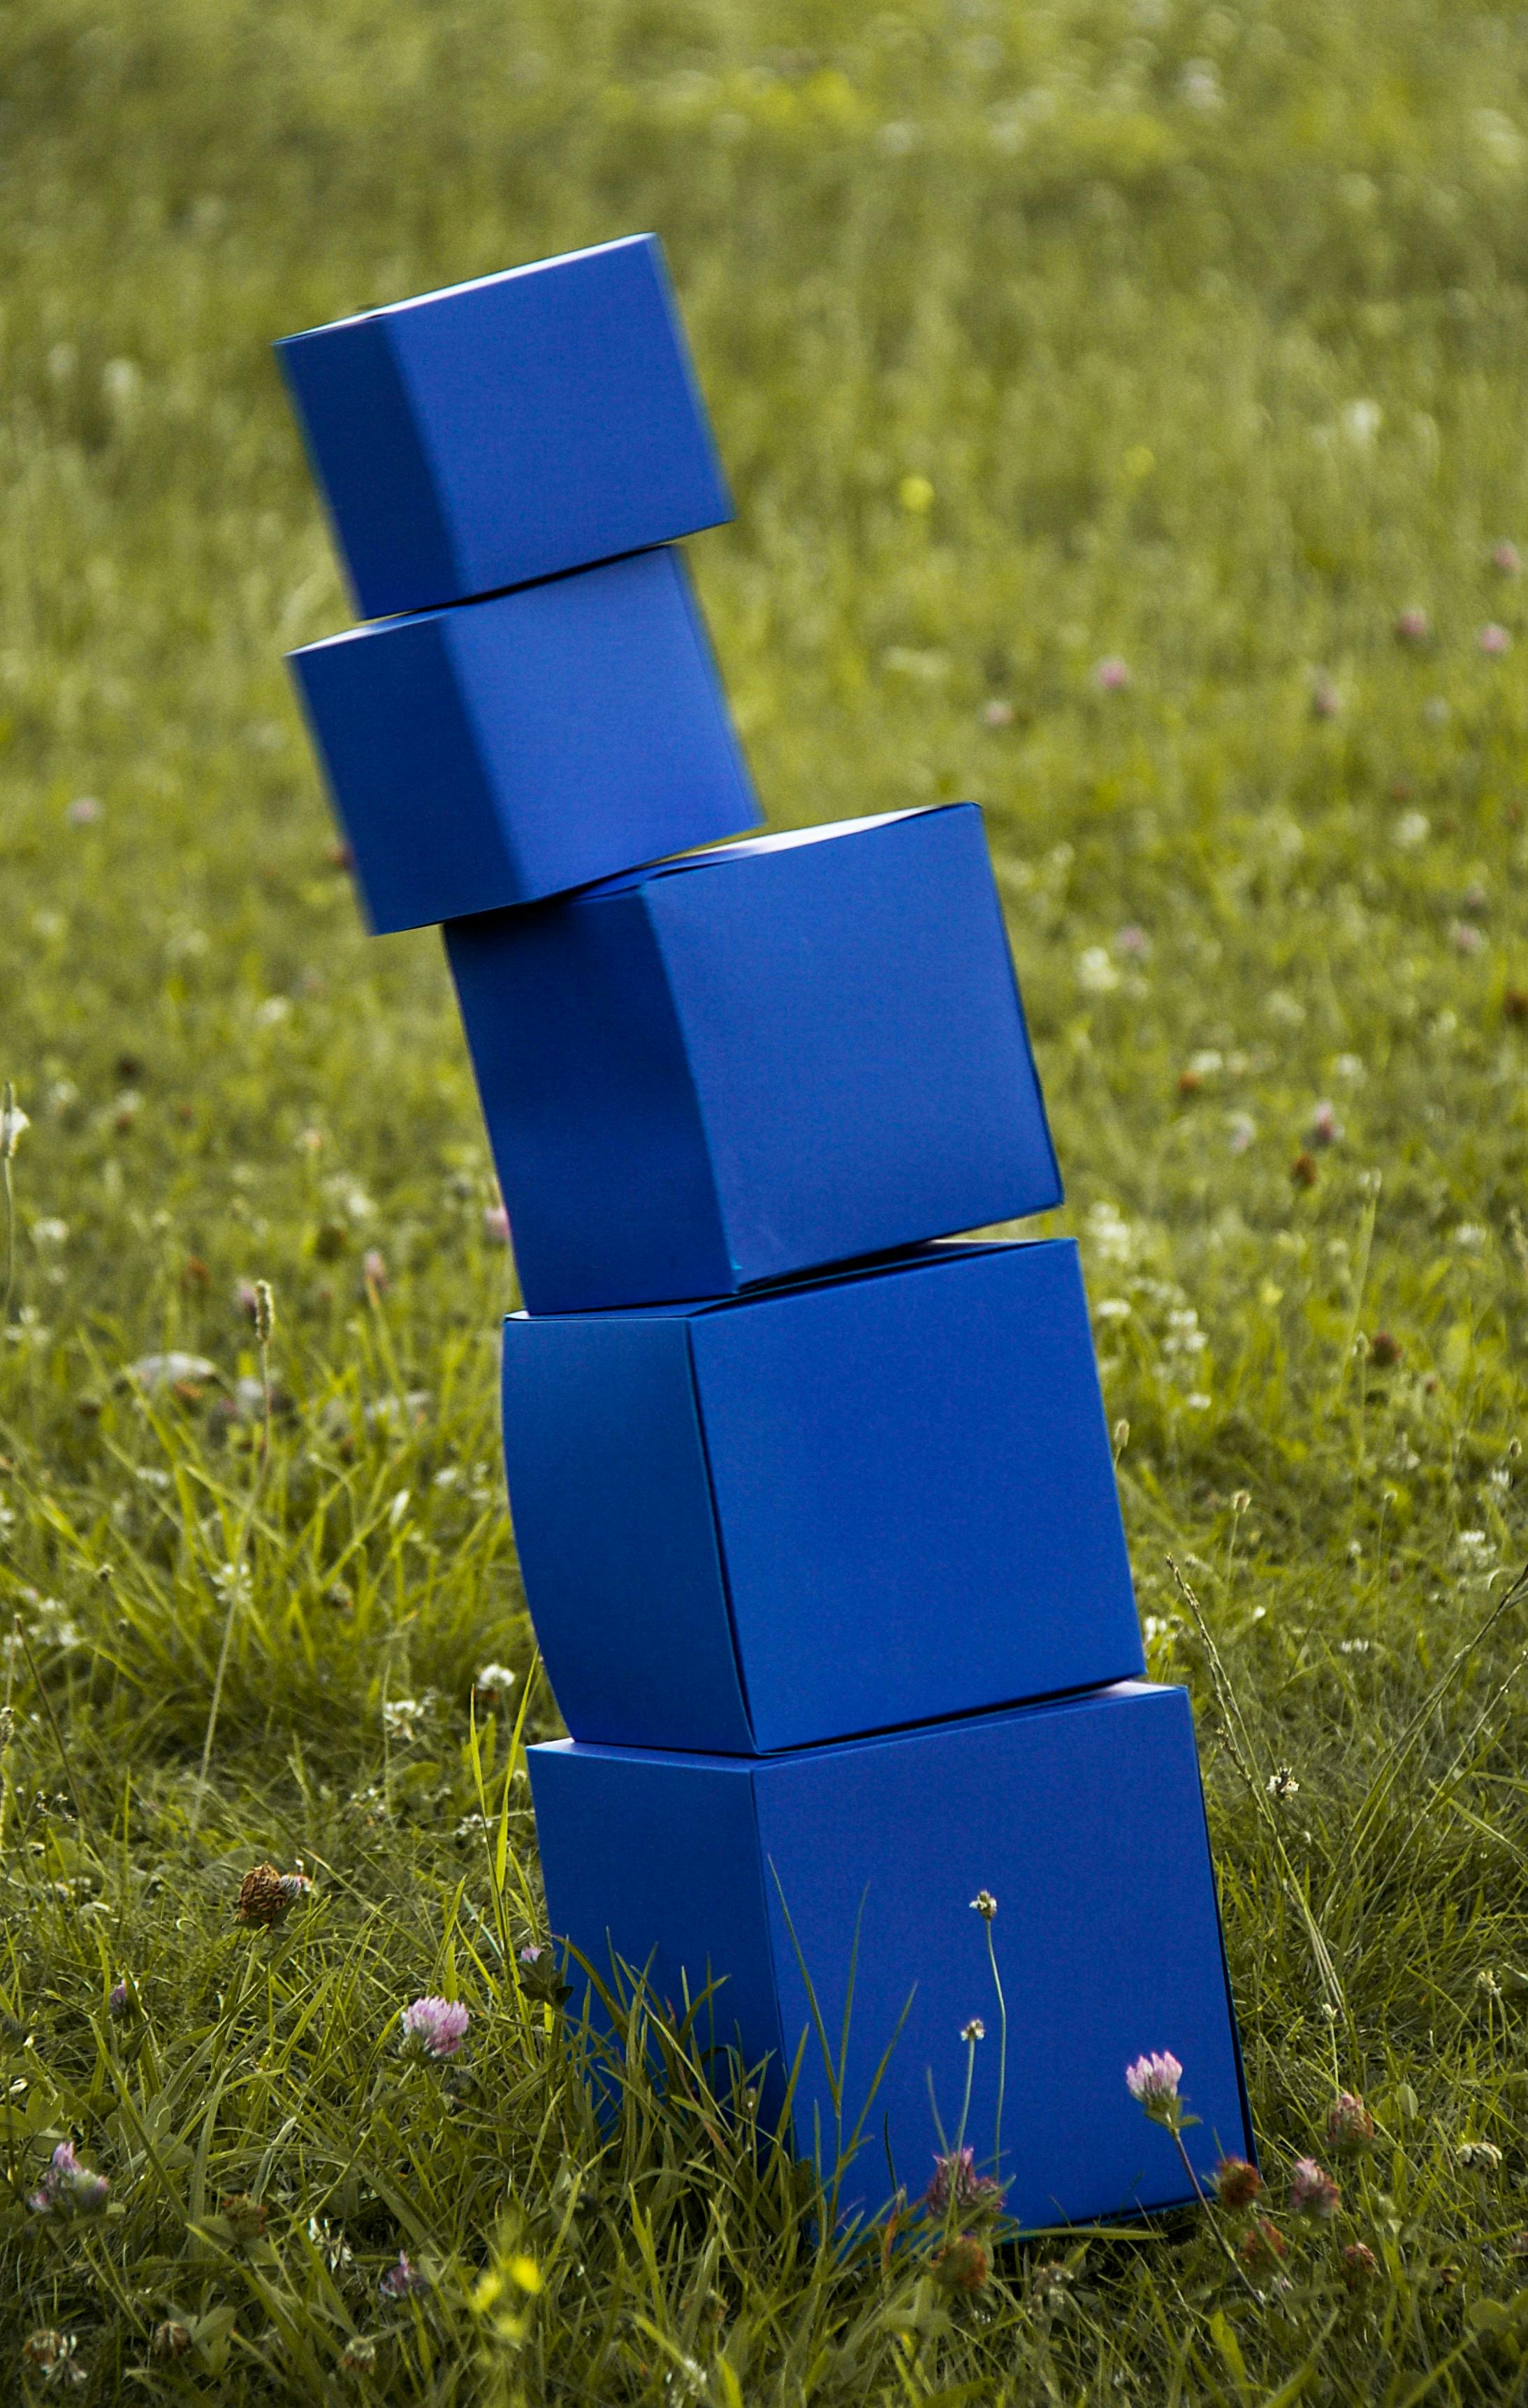 A stack of blue blocks ready to topple onto a green grass field